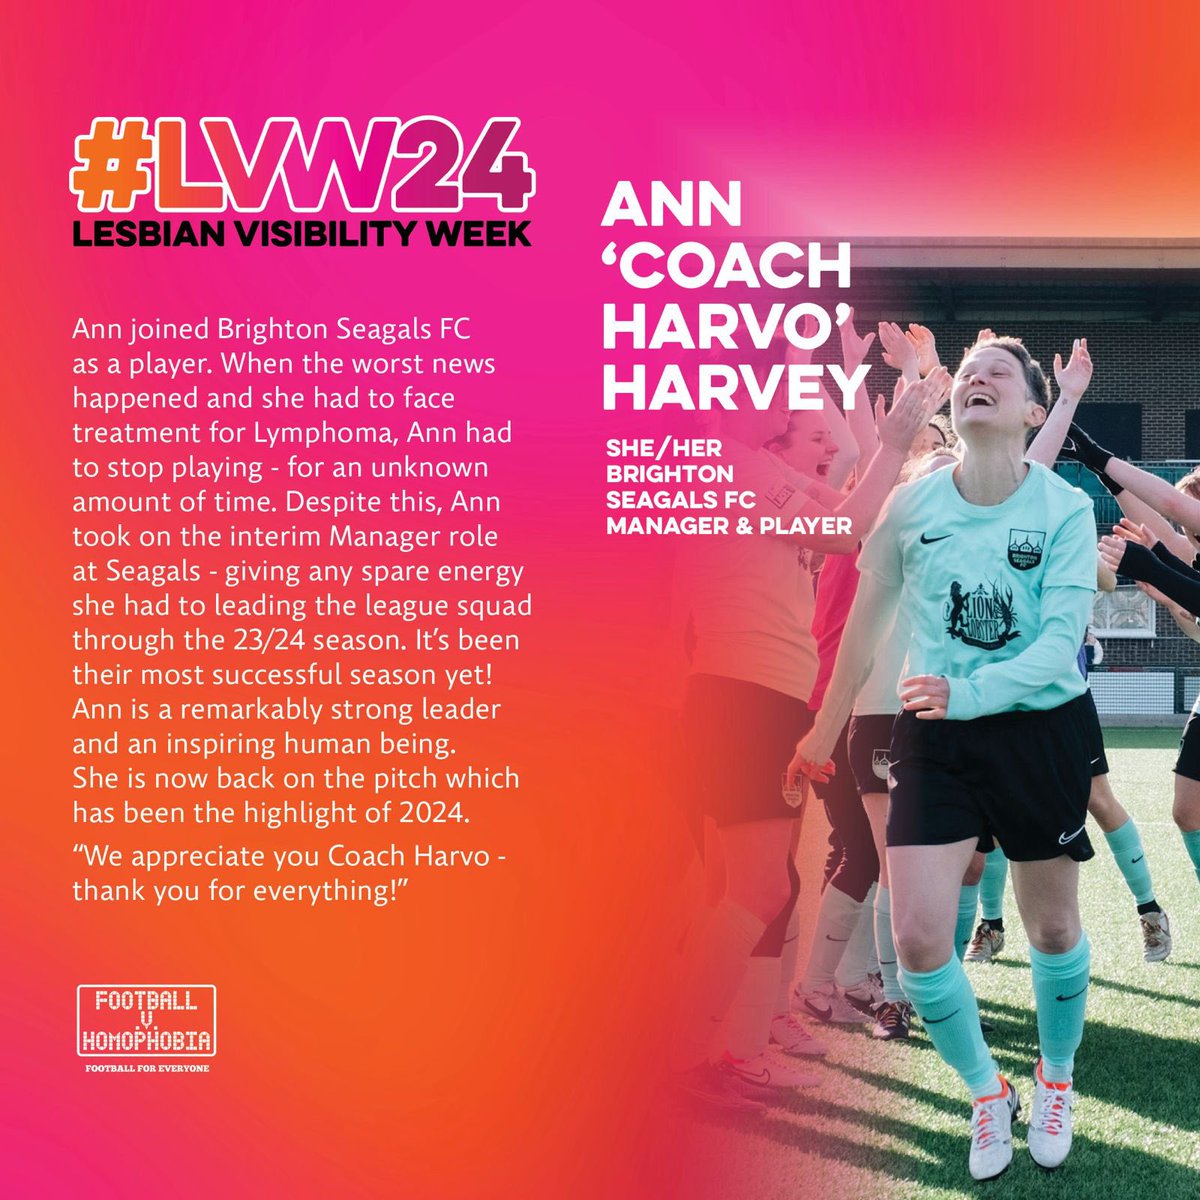 Our final celebration for #LesbianVisibilityWeek is Ann ‘Coach Harvo’ Harvey (she/her) Read Ann’s incredible football story at Brighton Seagals FC below 👇 #LVW24 | #unifiednotuniform